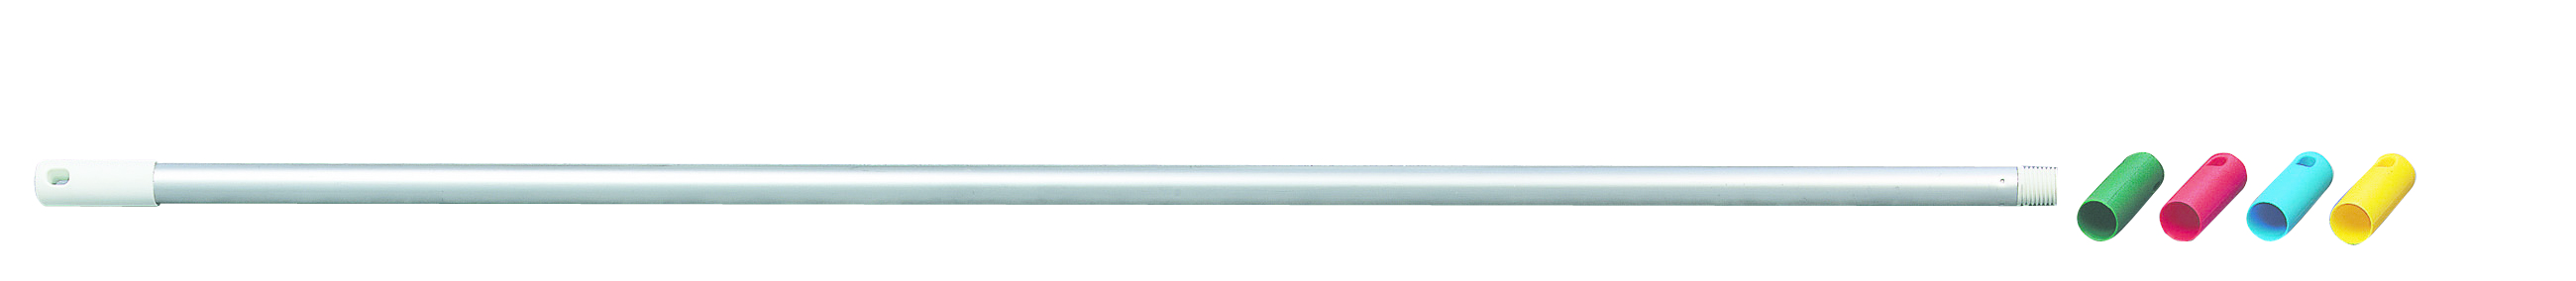 Lightweight Aluminium handle with colour coded grip - Blue